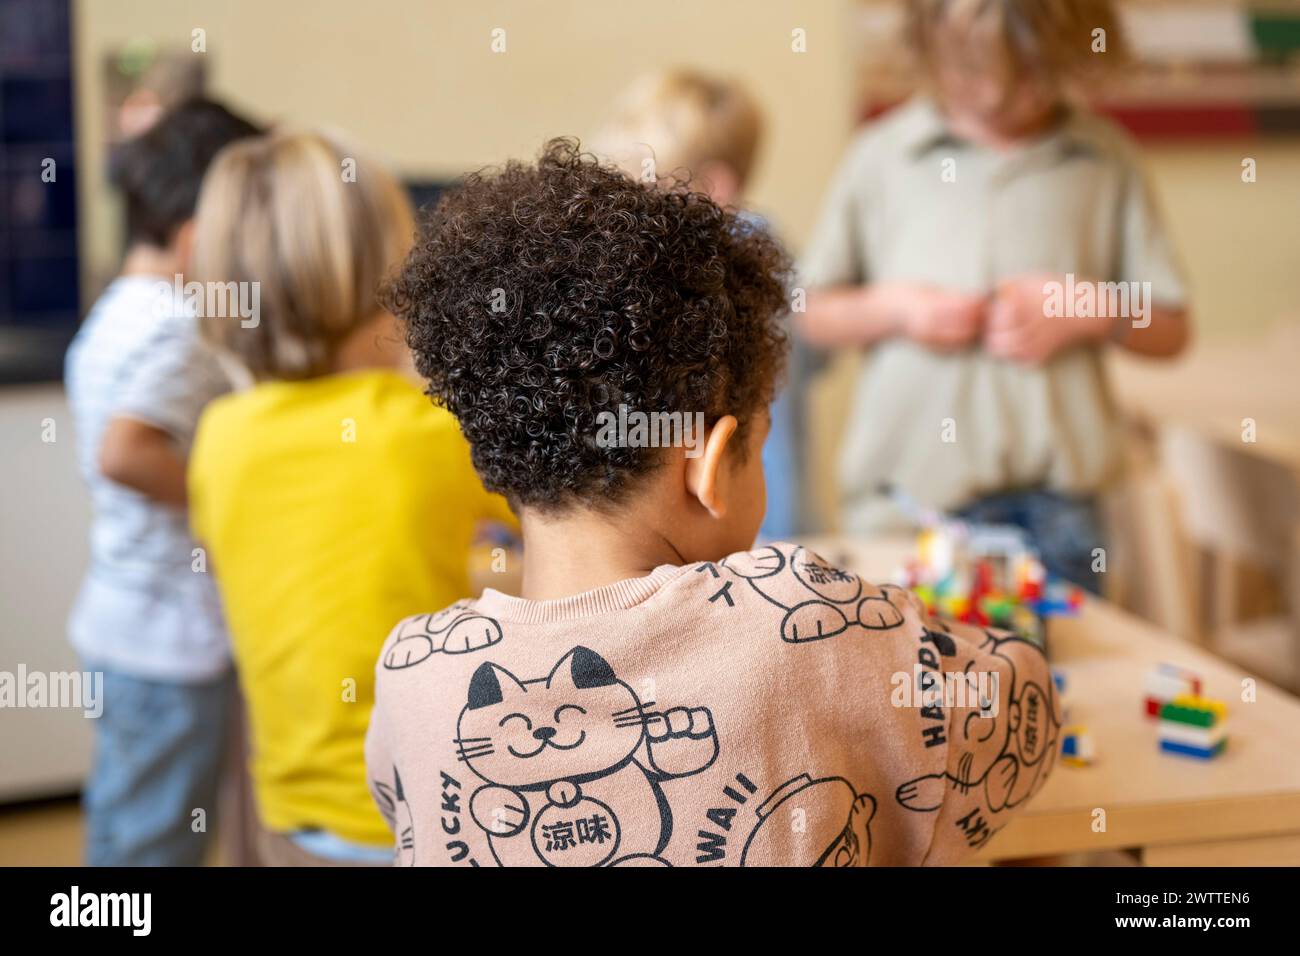 Curious child observing peers during playtime. Stock Photo